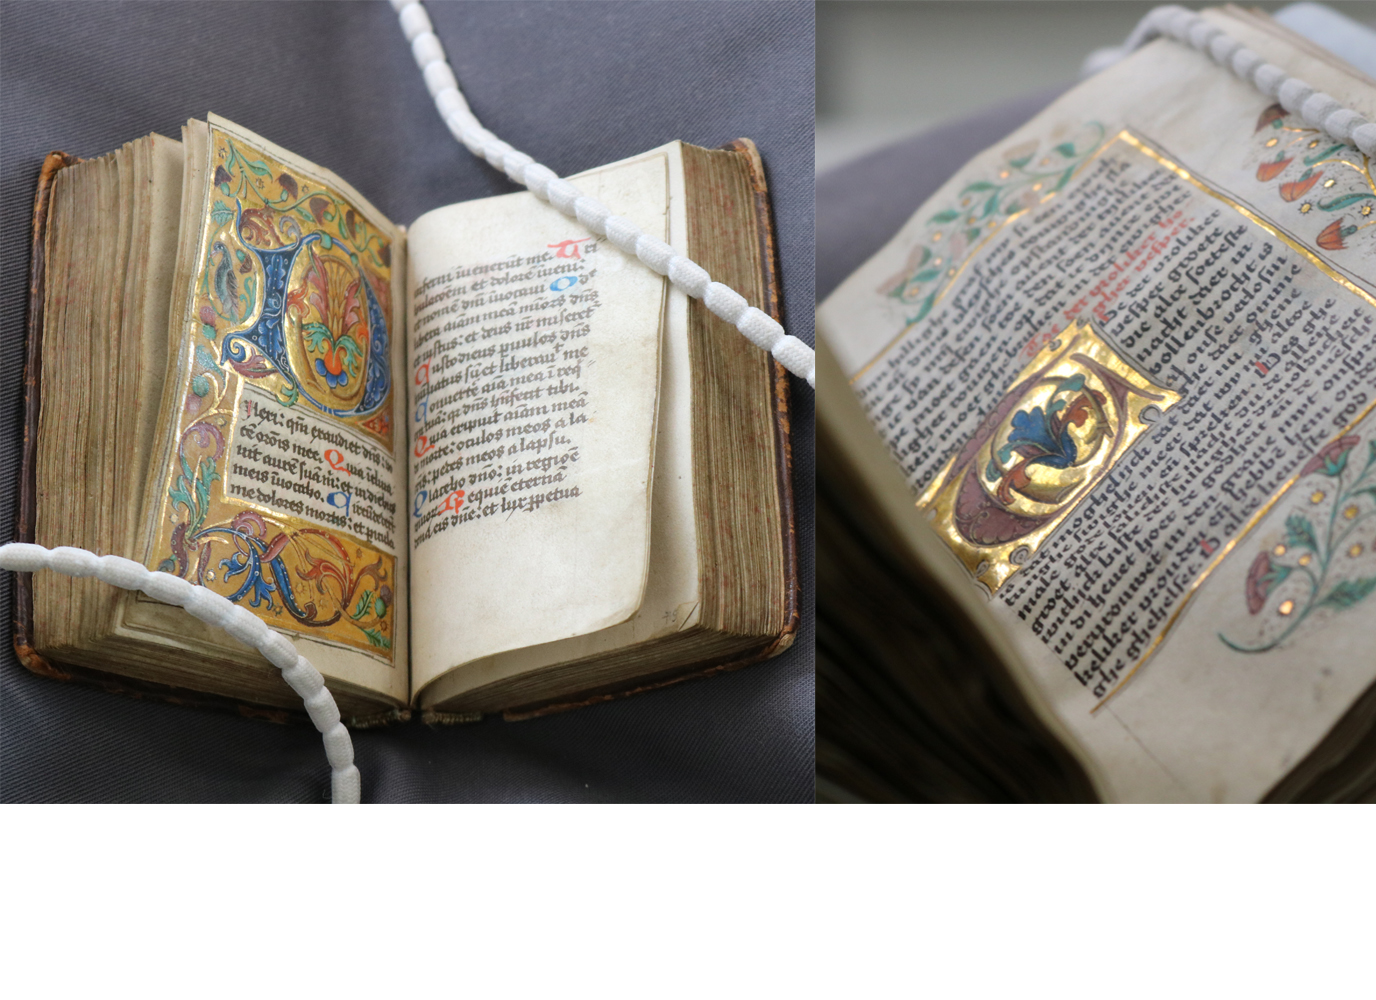 Book of hours (left) and Prayer Book from Thesinge